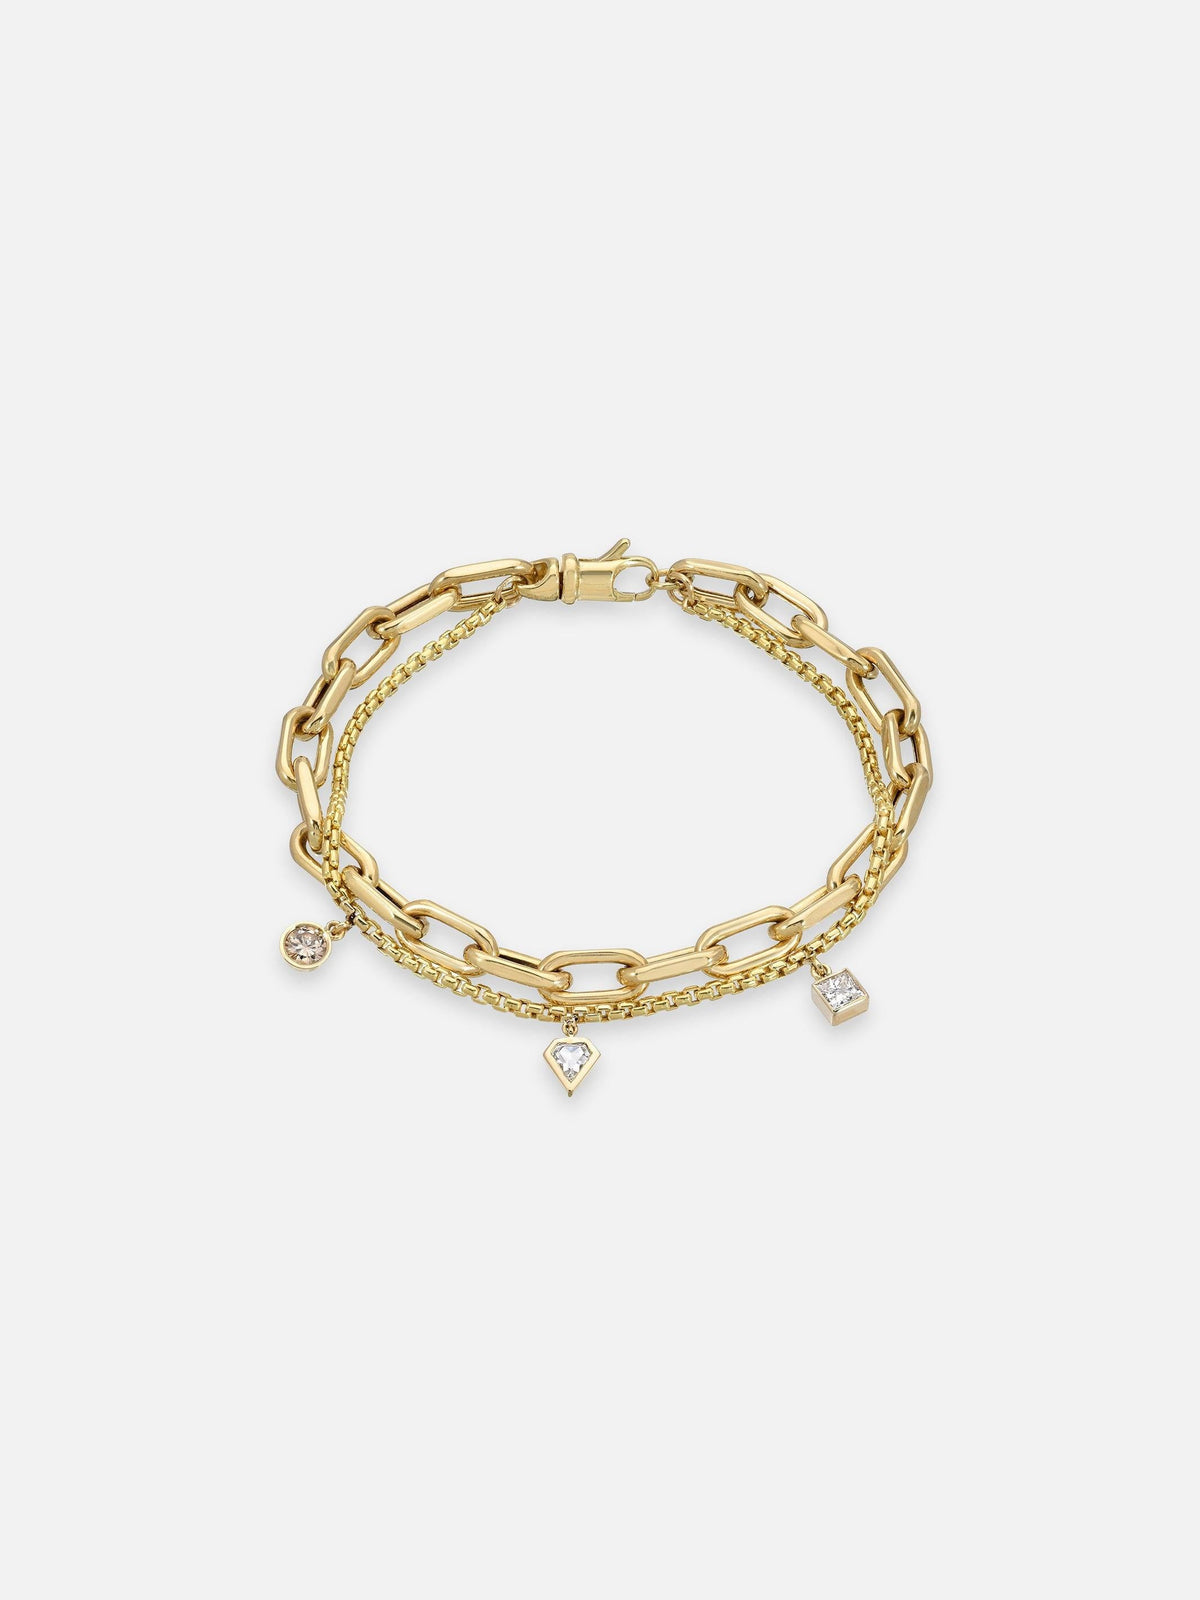 Meredith Young Elongated Link Double Bracelet 1